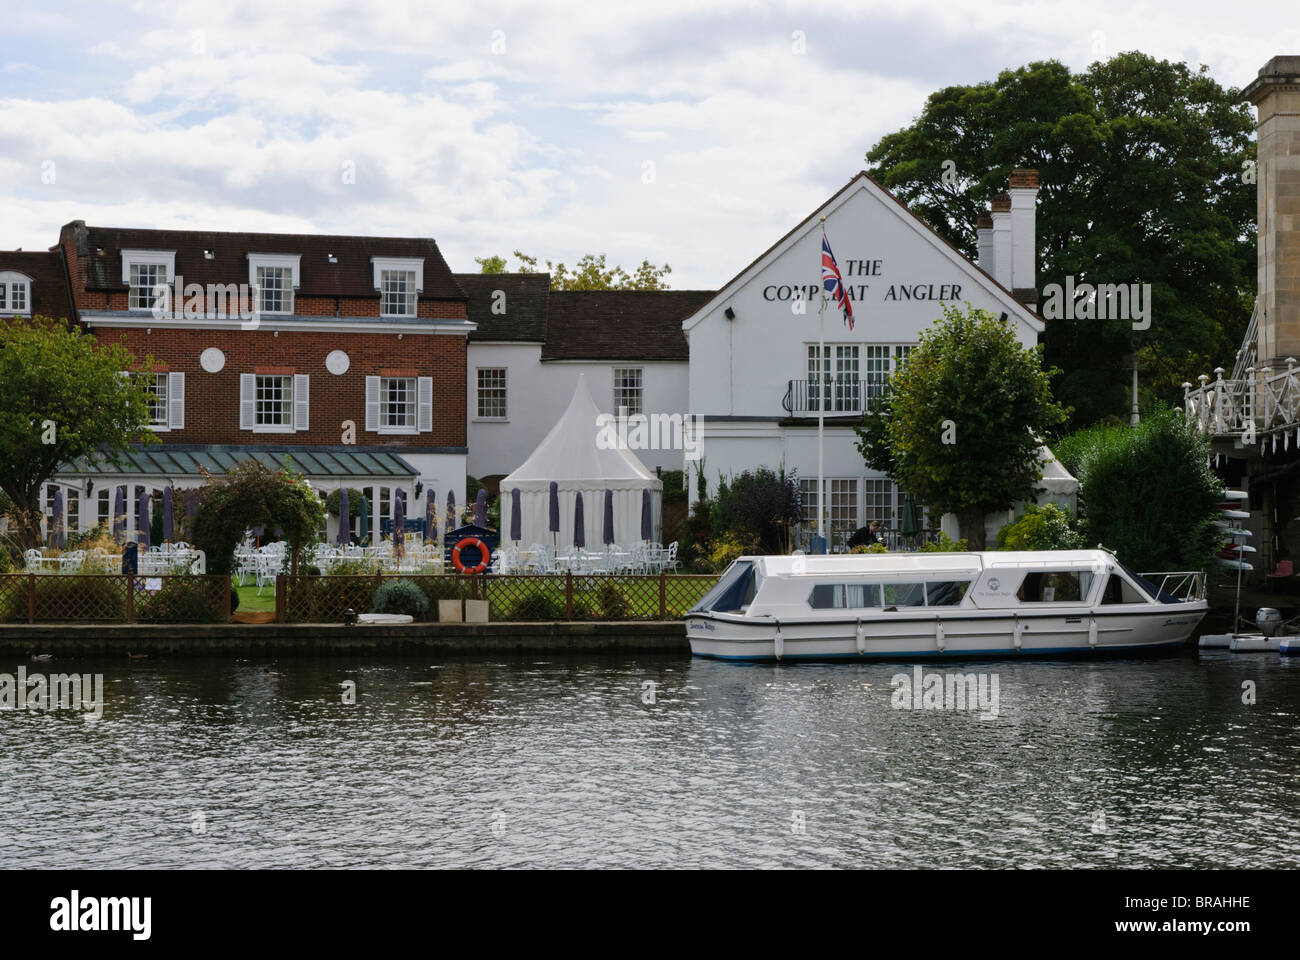 The Compleat Angler Restaurant by the River Thames, Marlow, Buckinghamshire, England, UK. Stock Photo